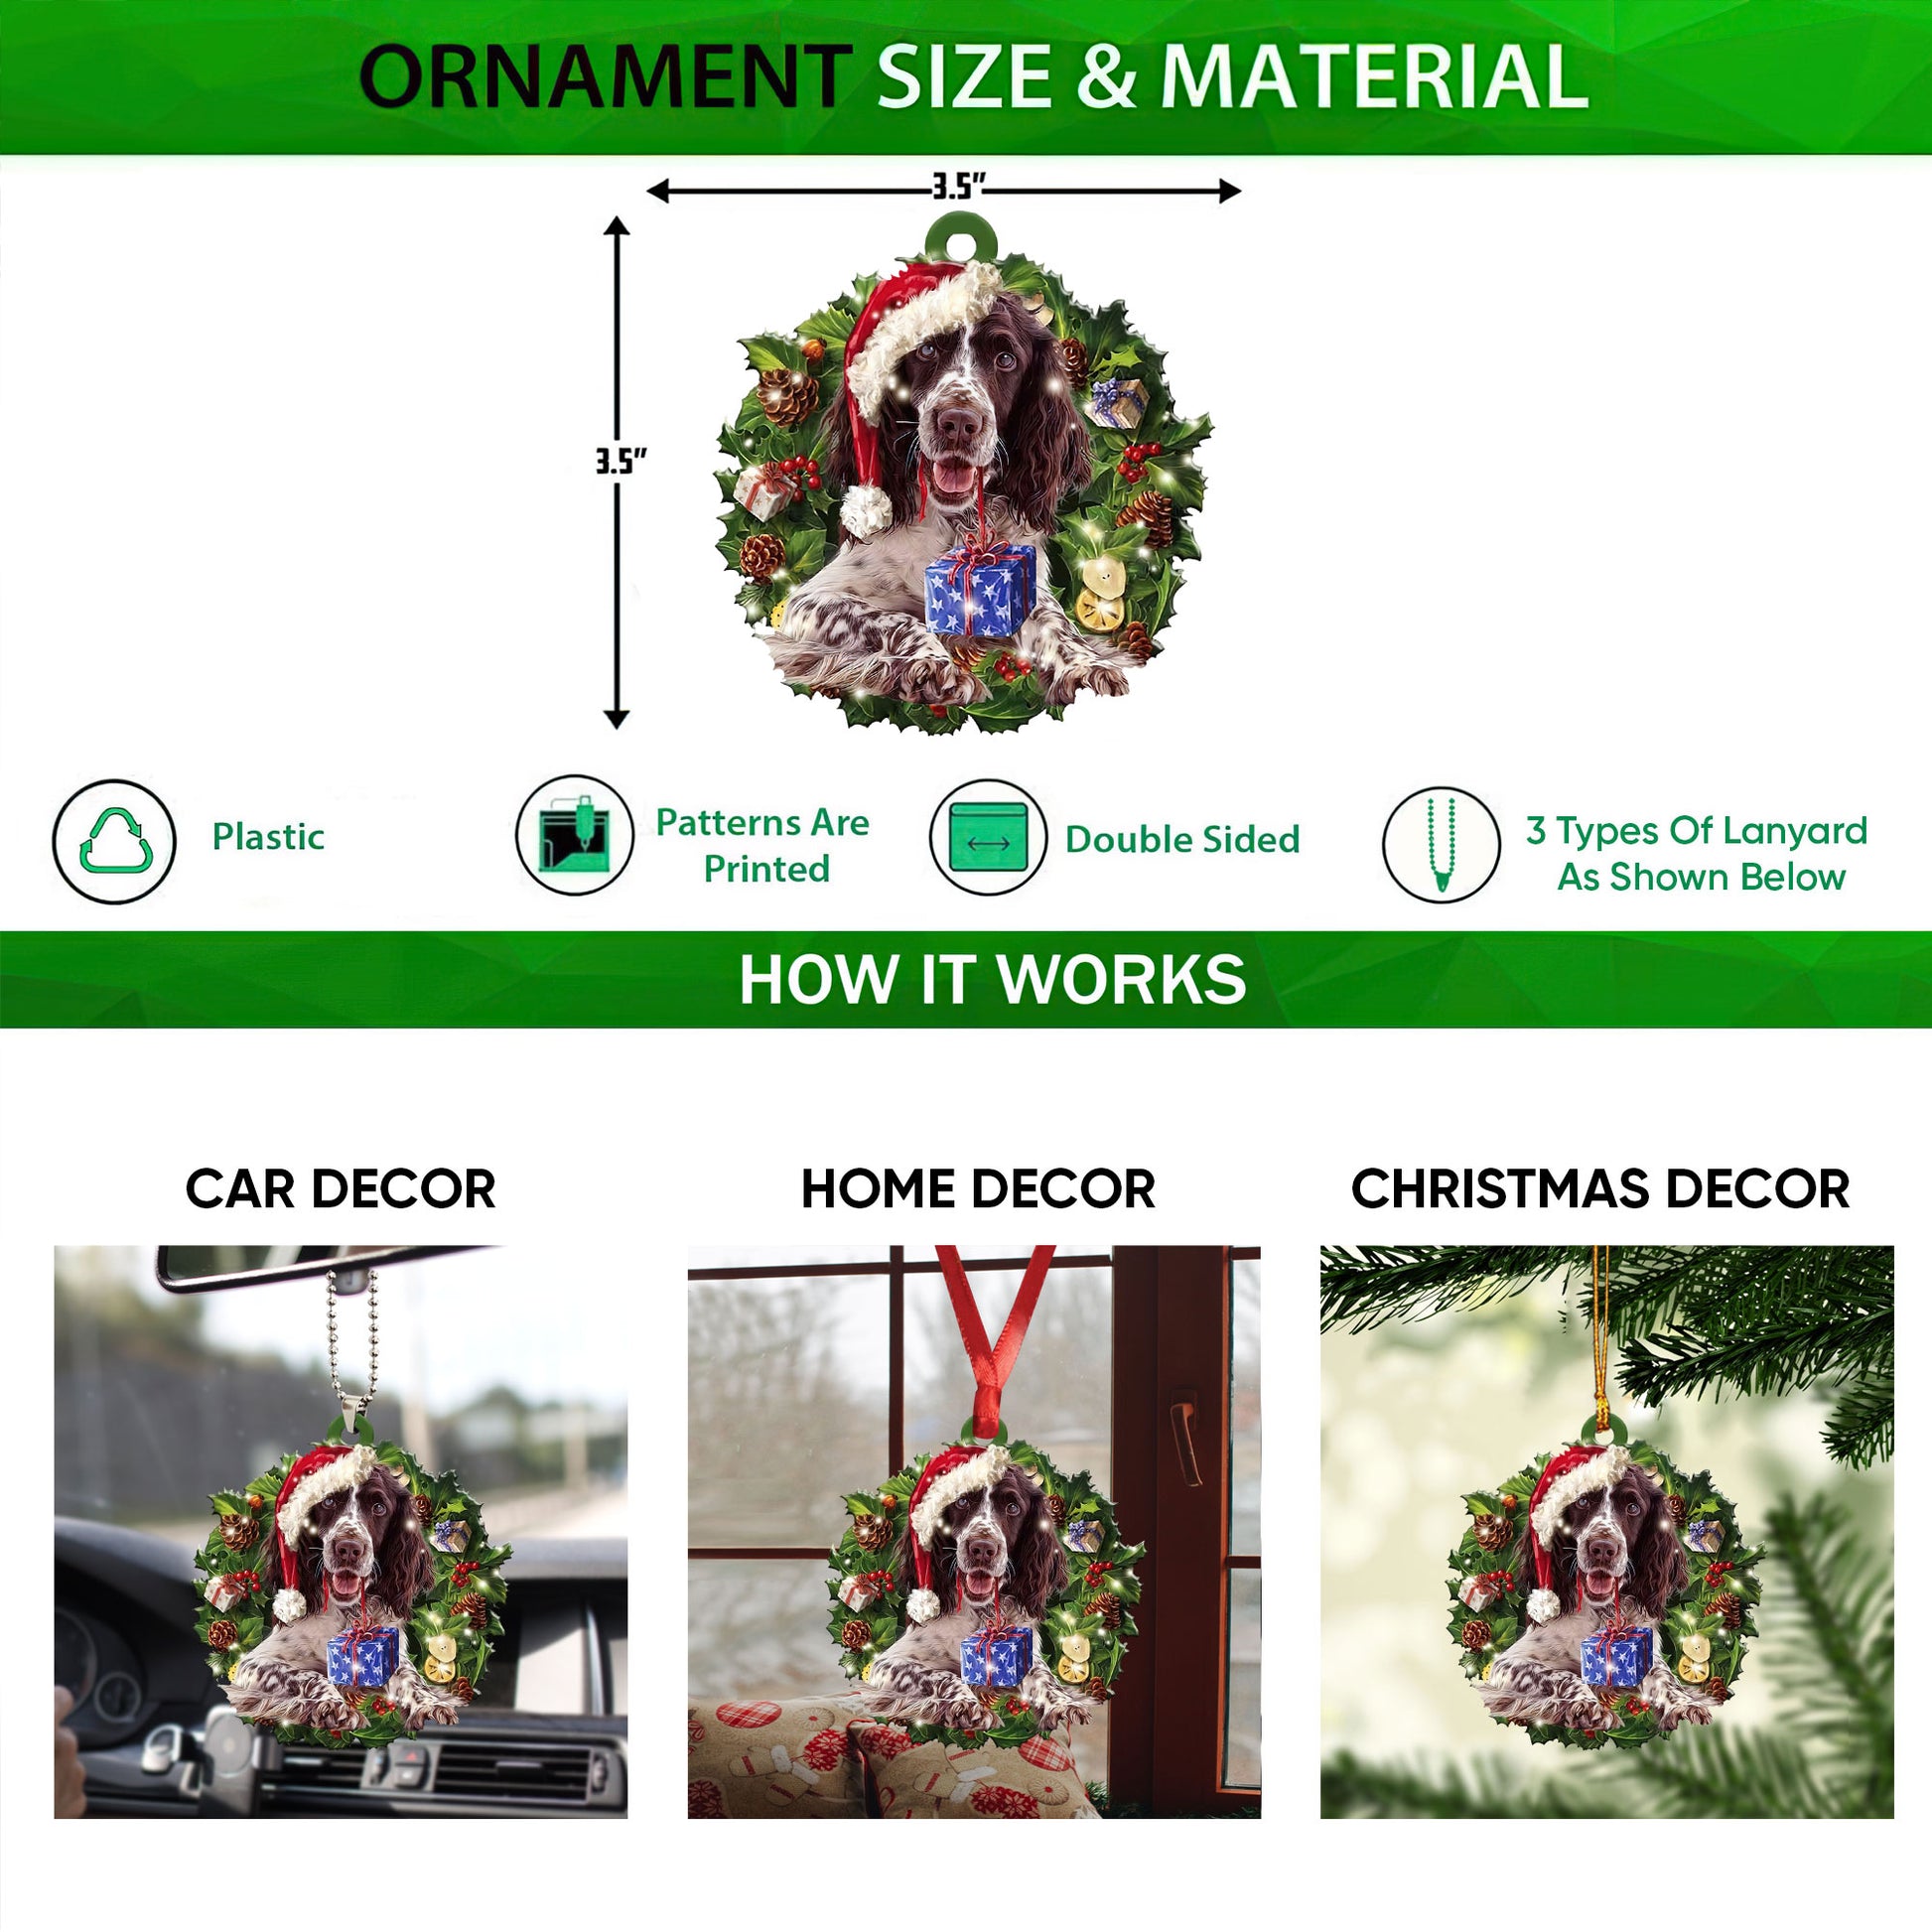 Ohaprints-Christmas-Ornament-2D-Flat-English-Springer-Spaniel-Wearing-A-Christmas-Hat-Wreath-Dog-Lover-Xmas-Tree-Decor-Gift-270